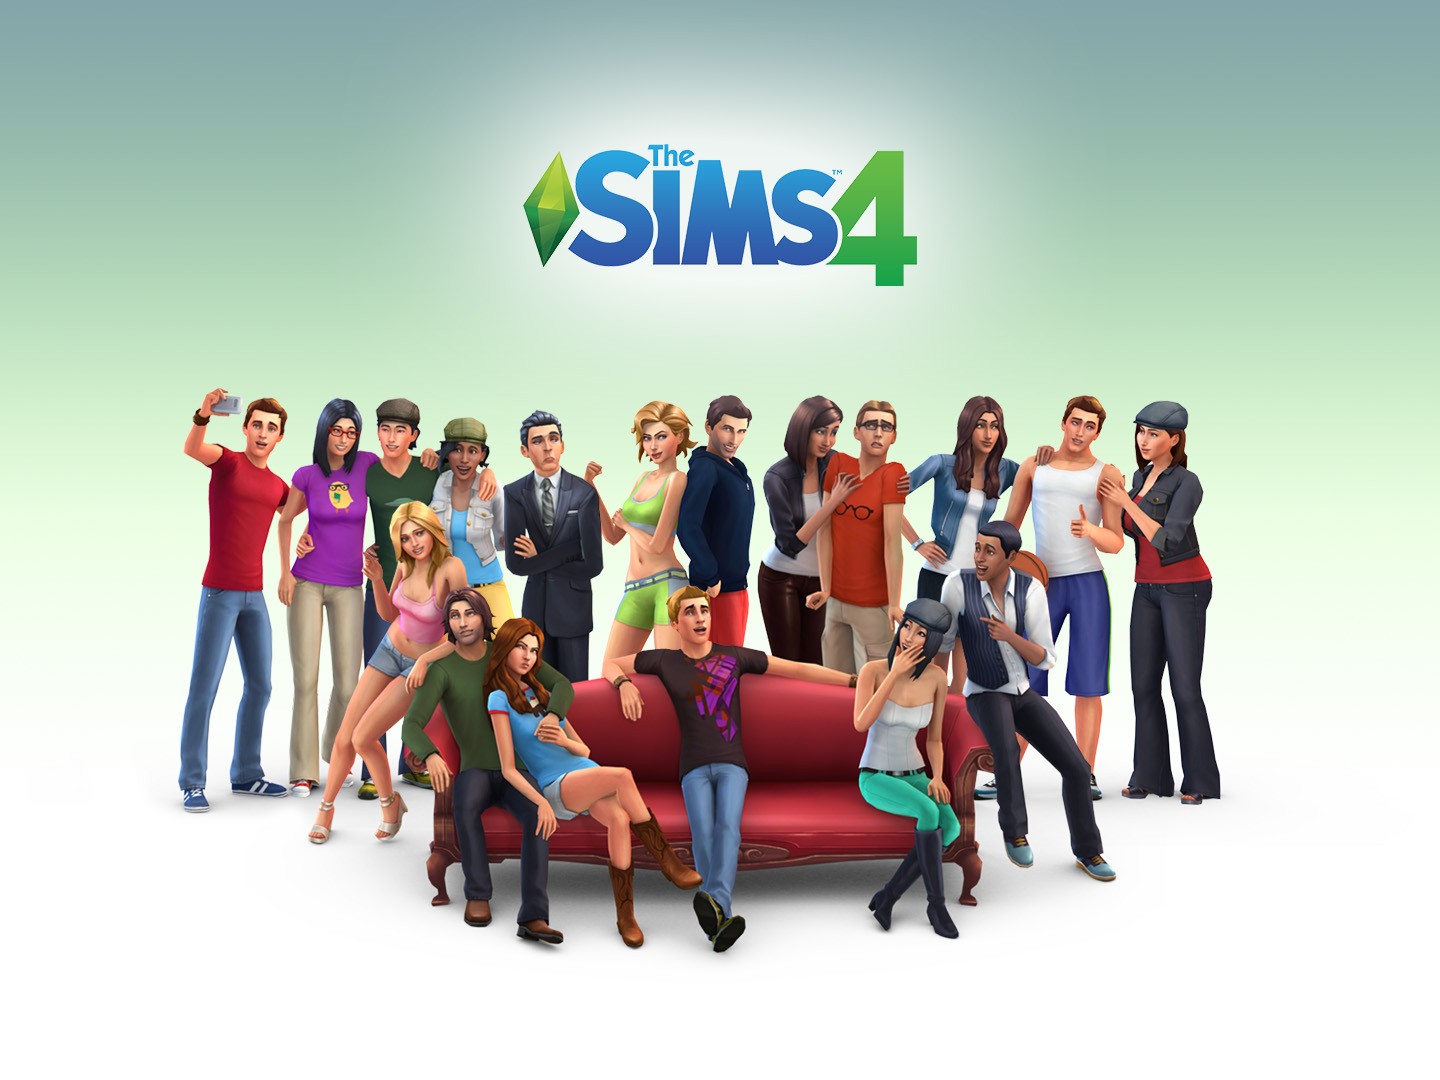 The-Sims-4-Game-Wallpaper-1440x1080